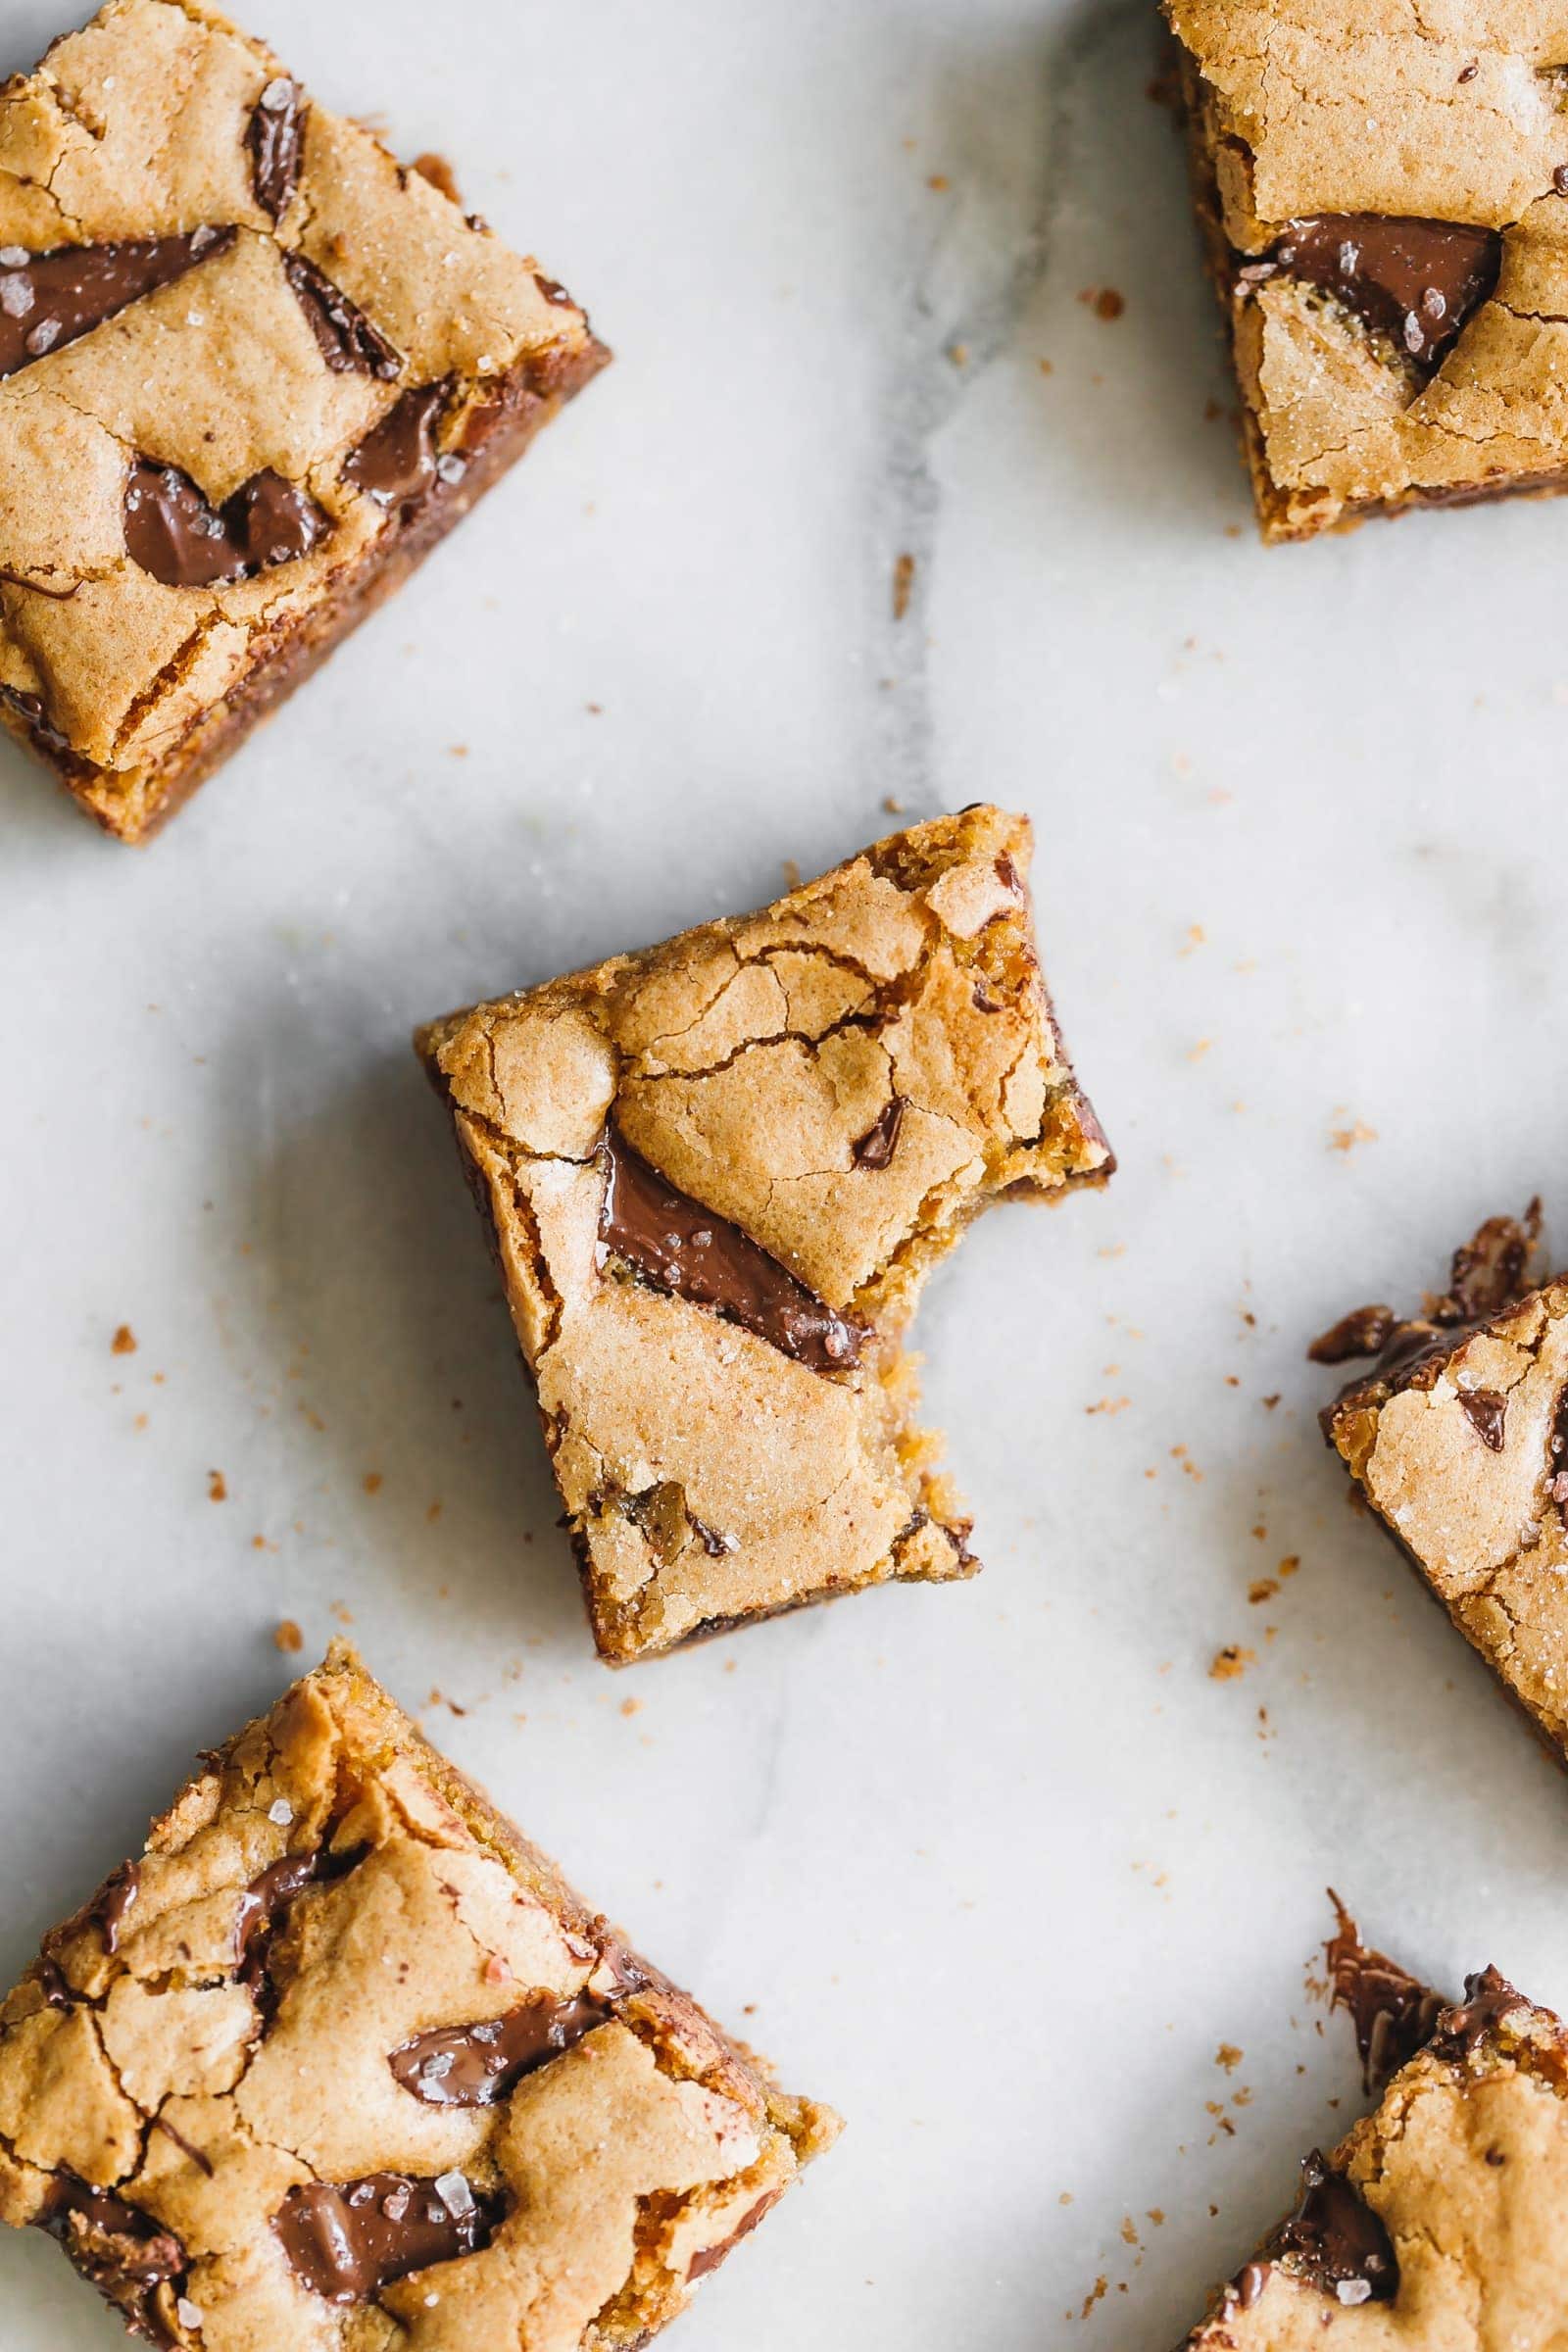 Incredibly soft, moist, thick and chewy chocolate chunk cookie bars made with coconut oil instead of butter, all in one bowl!